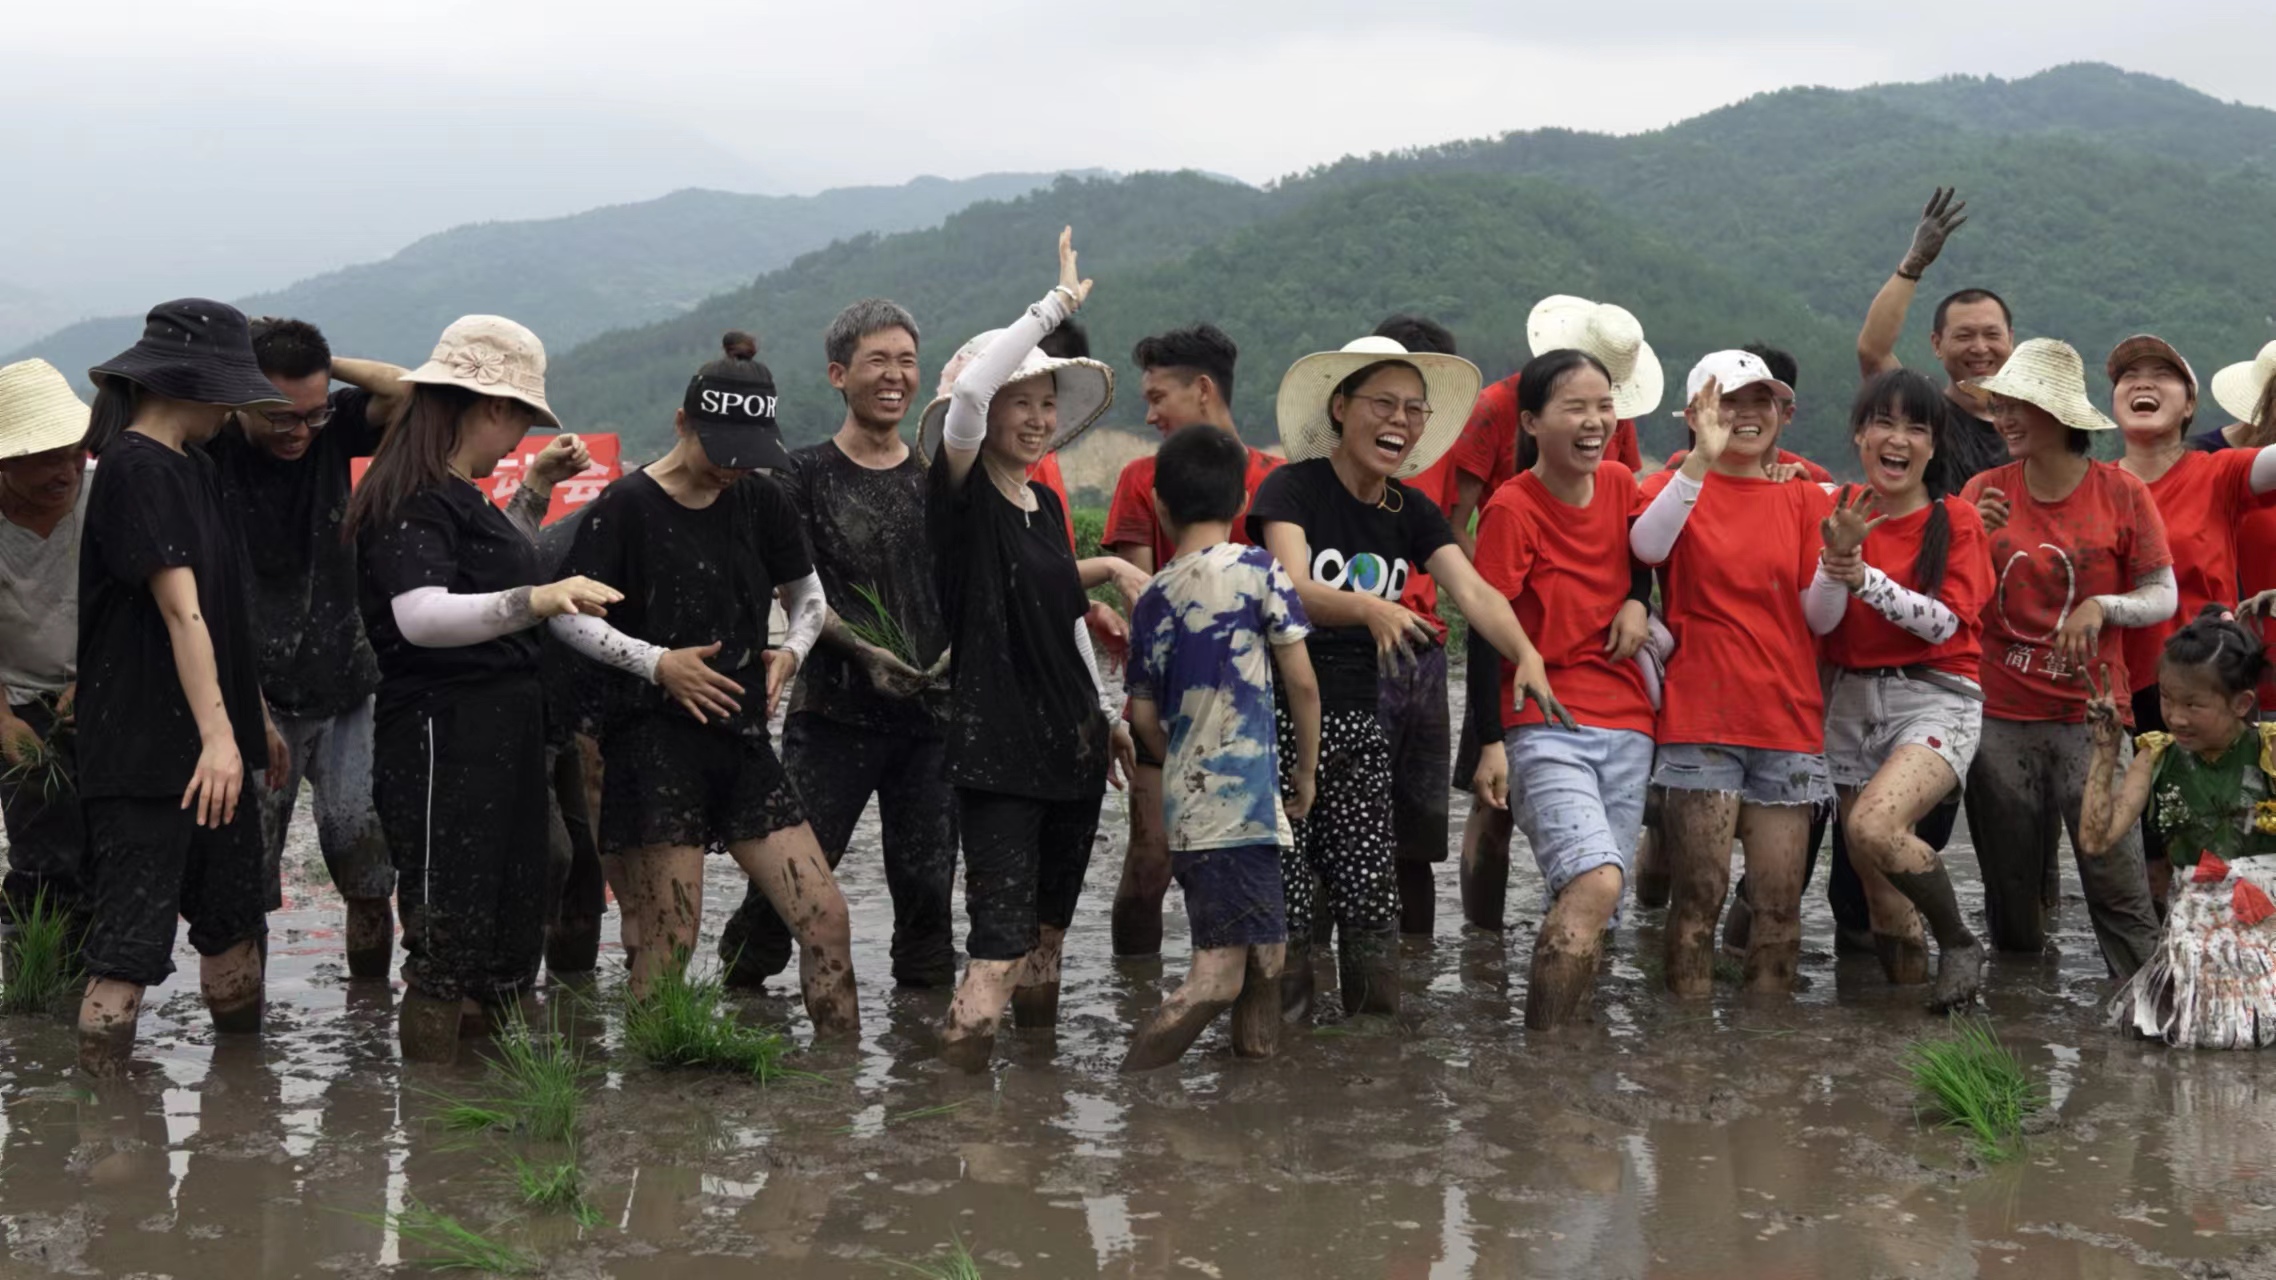 Li Mingpan (sixth from left) and his company staff pose for a group photo after a rice field sports meeting in Huanggang City, central China's Hubei Province, June, 2021. /Courtesy of Li Mingpan